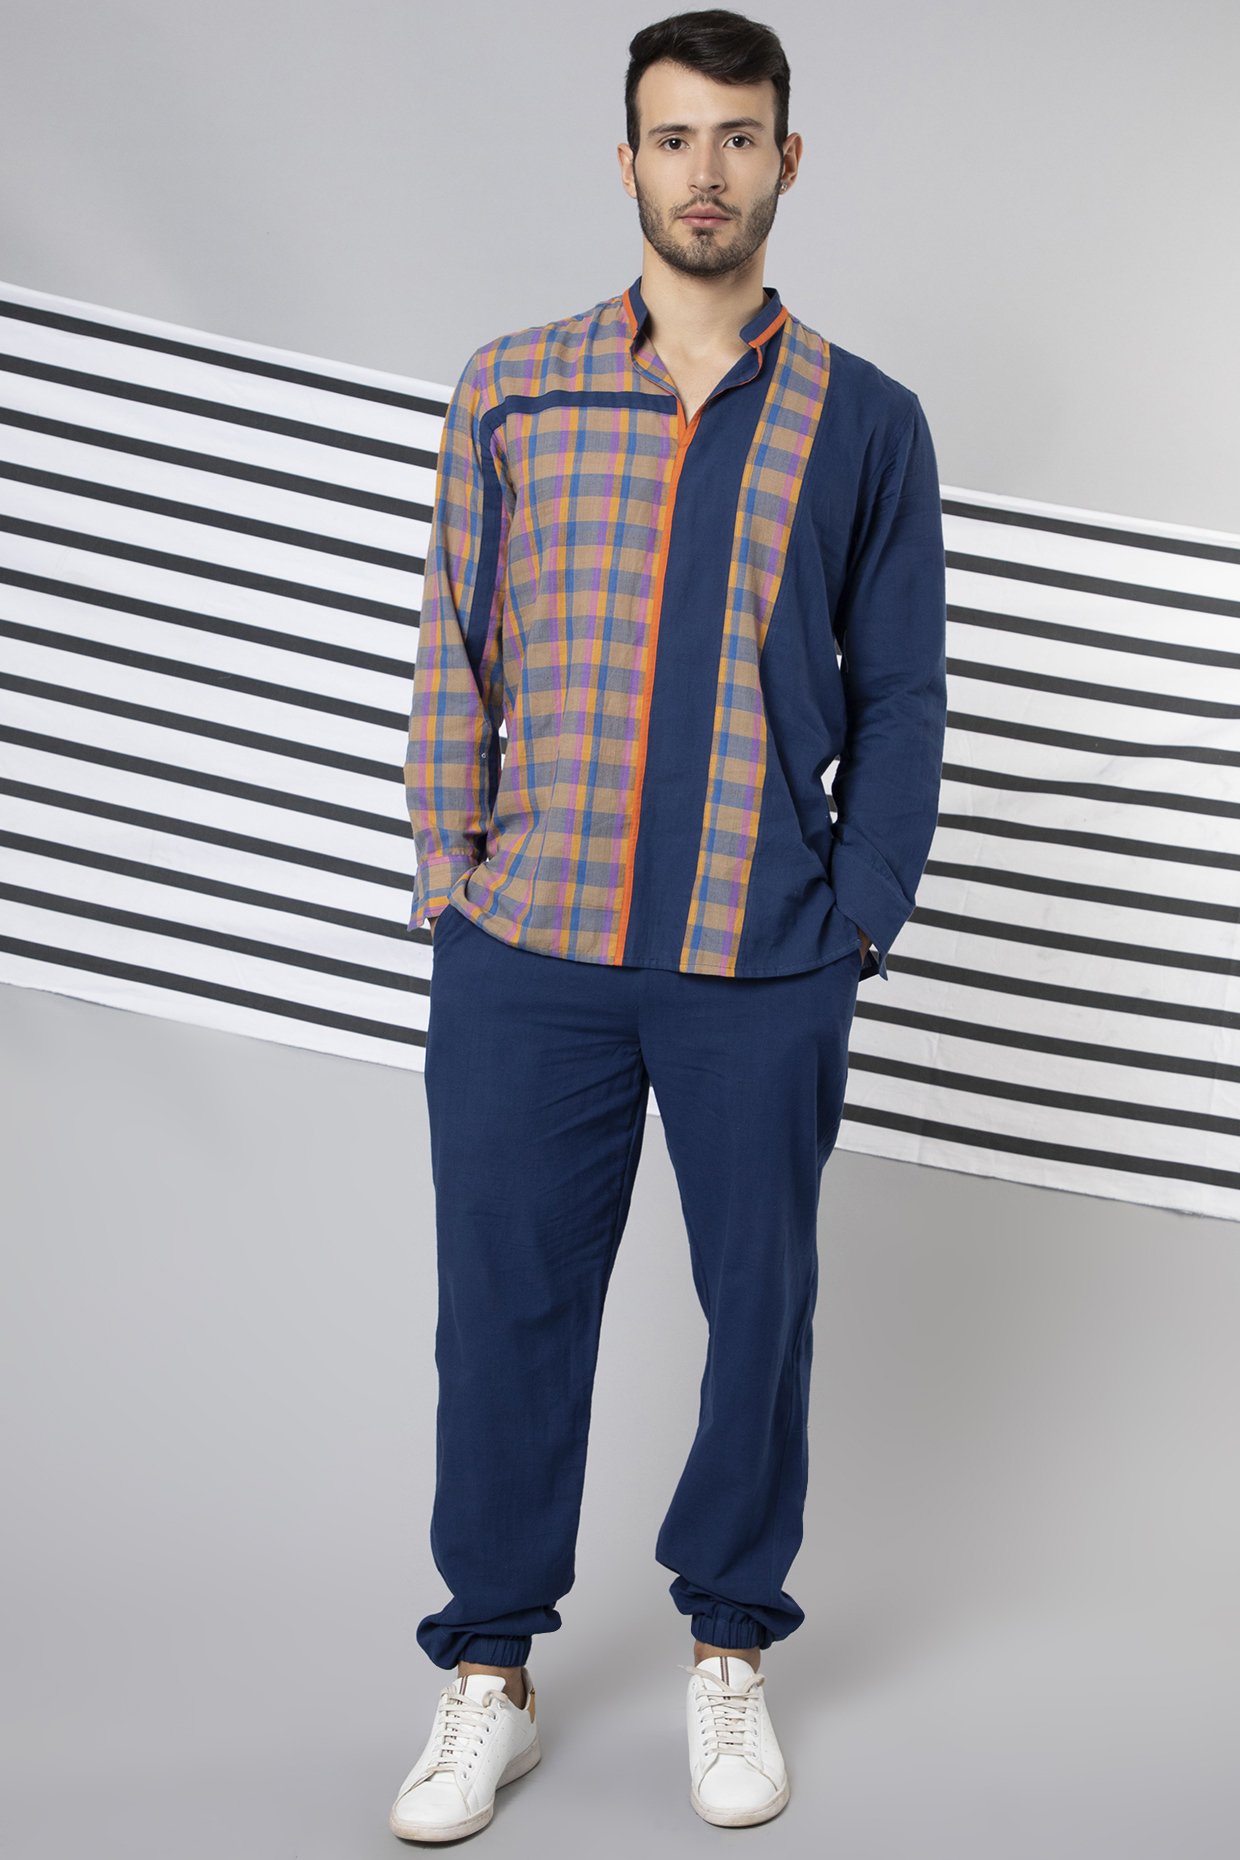 Plaid Pants with Vertical Striped Shirt Summer Outfits For Men 18 ideas   outfits  Lookastic